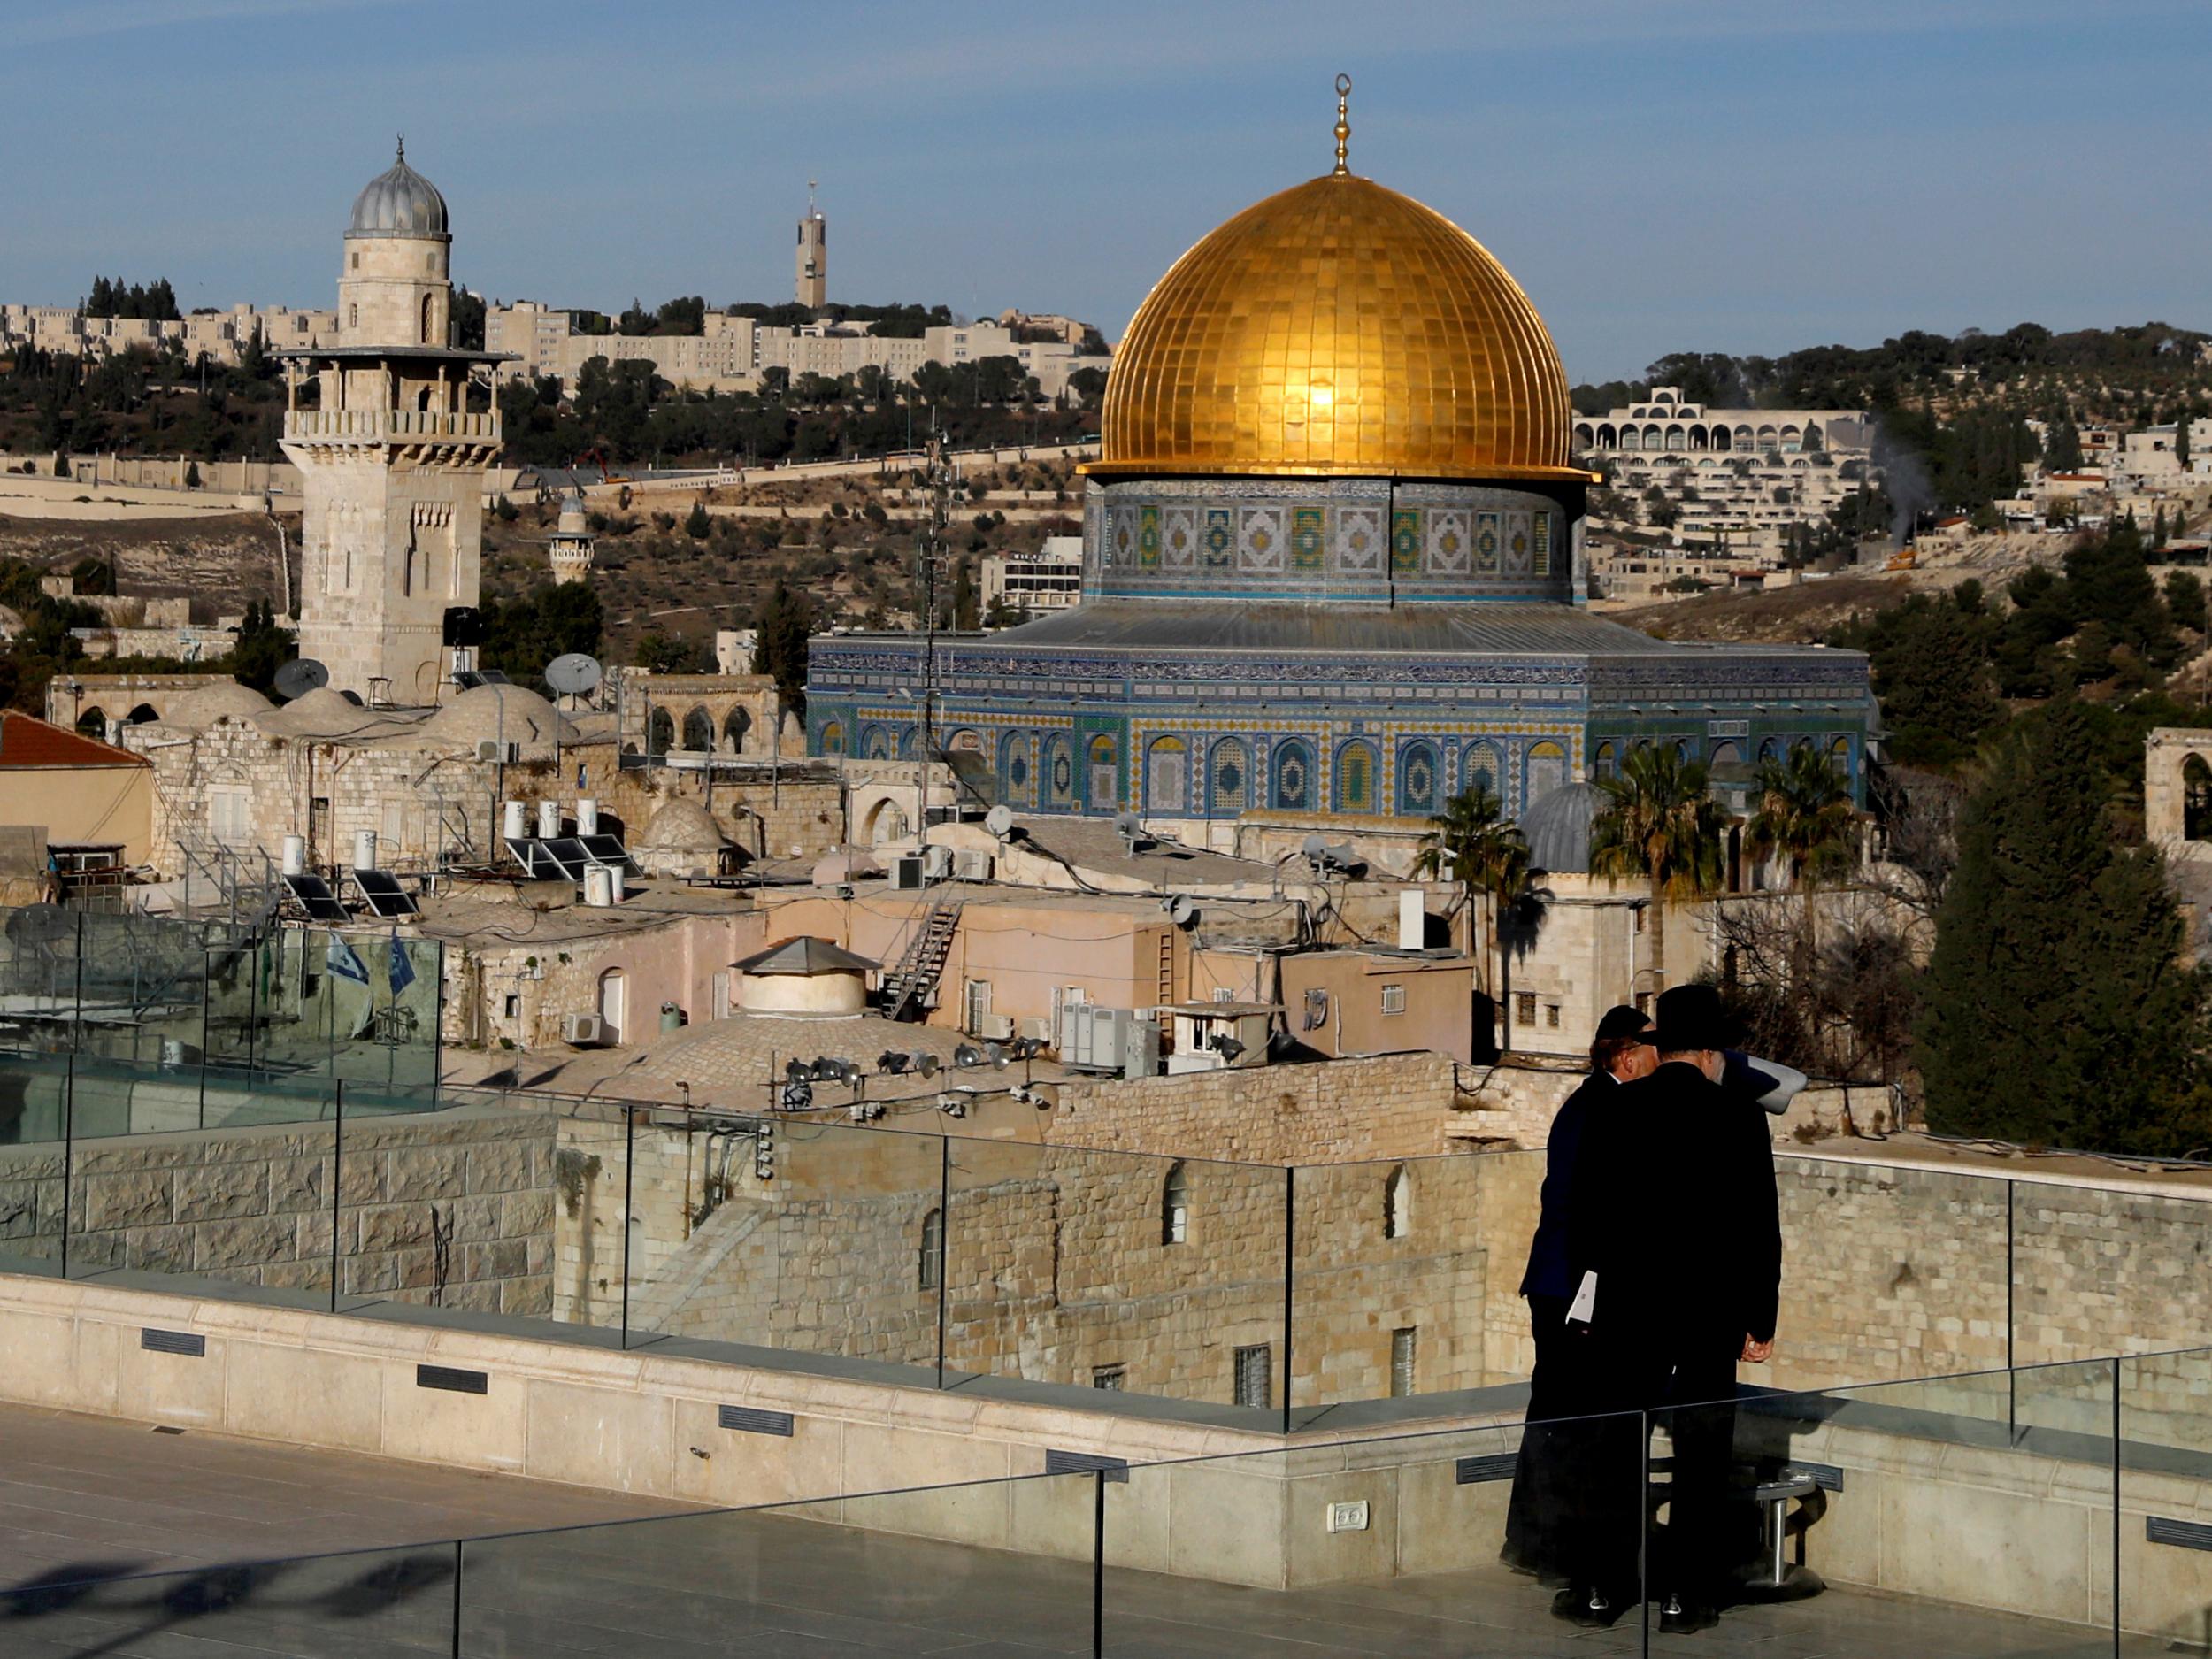 The Dome of the Rock and Jerusalem's Old City